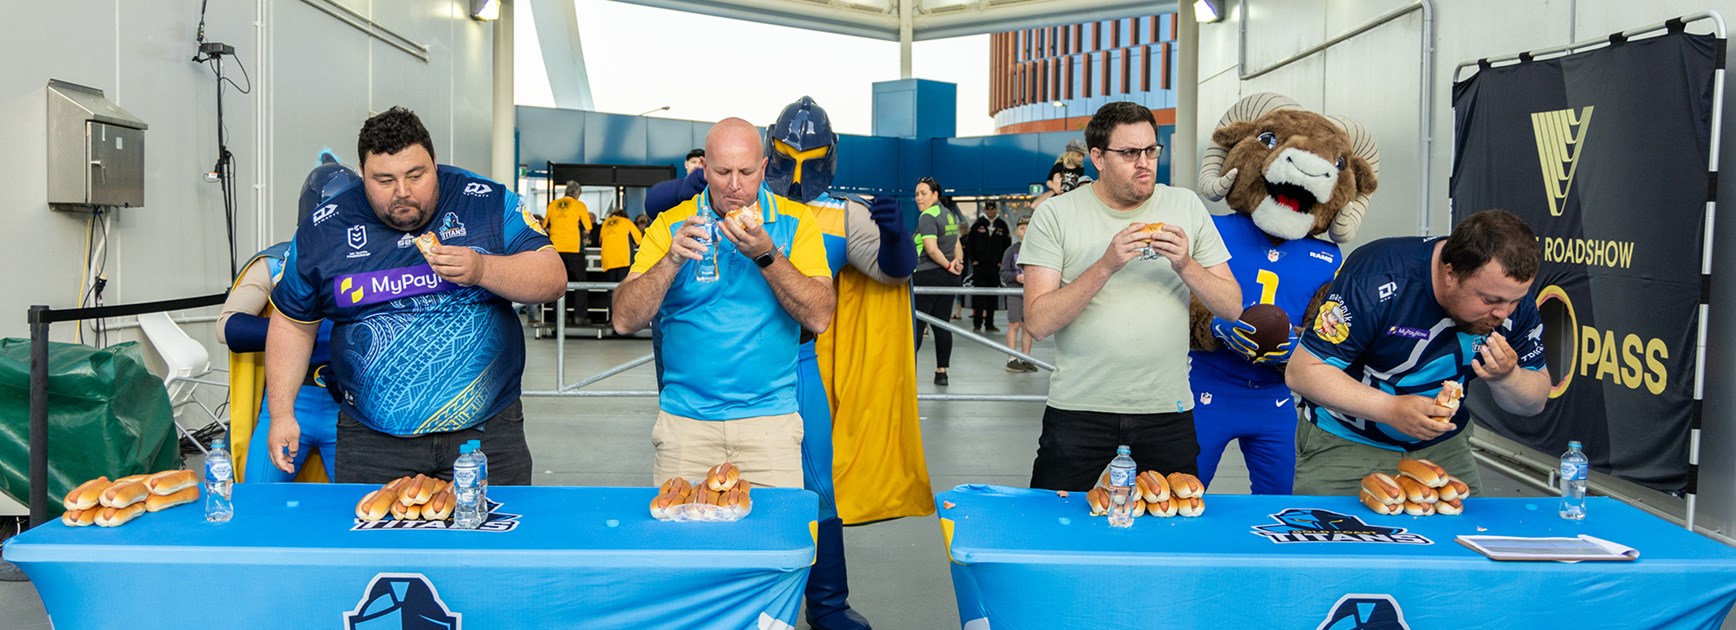 Enter the Titans Hot Dog Eating Contest today